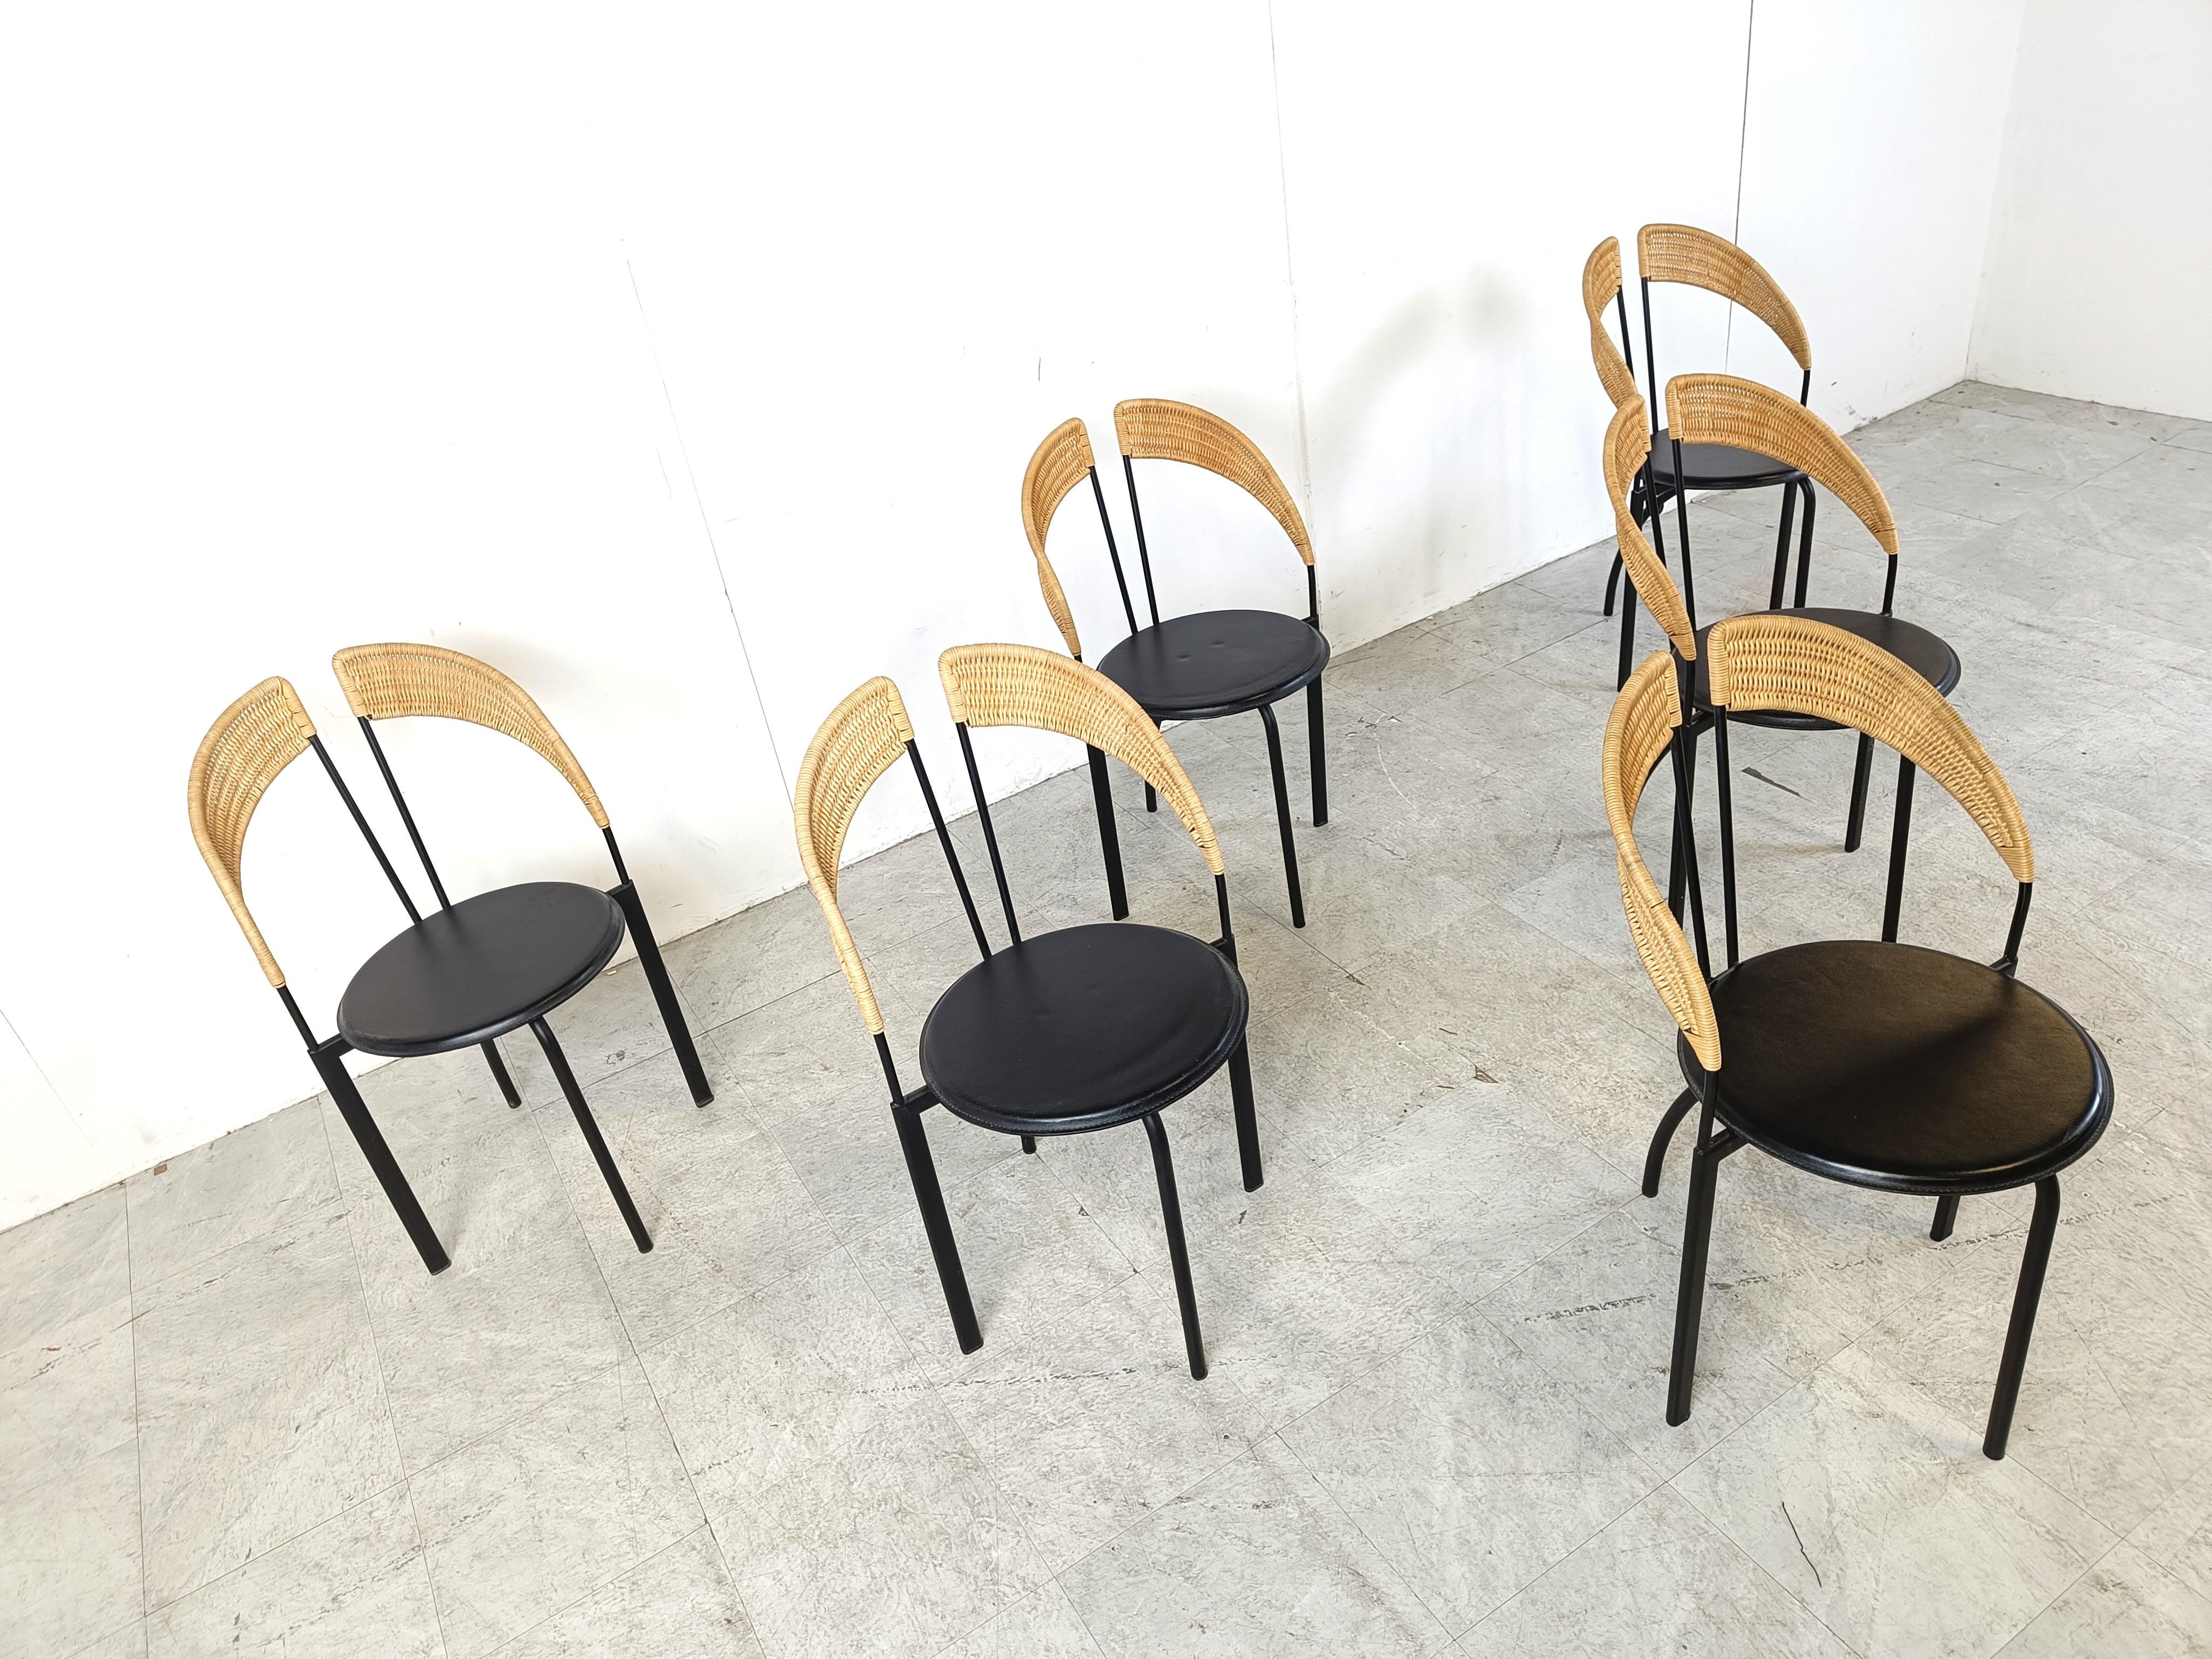 Set of 6 wicker and metal postmodern dining chairs.

These unique chairs consist of a black metal frame, round leather seats and finely crafted metal and wicker backrests.

Designed in the 1980s in Italy

Very good condition

Dimensions:
Height: